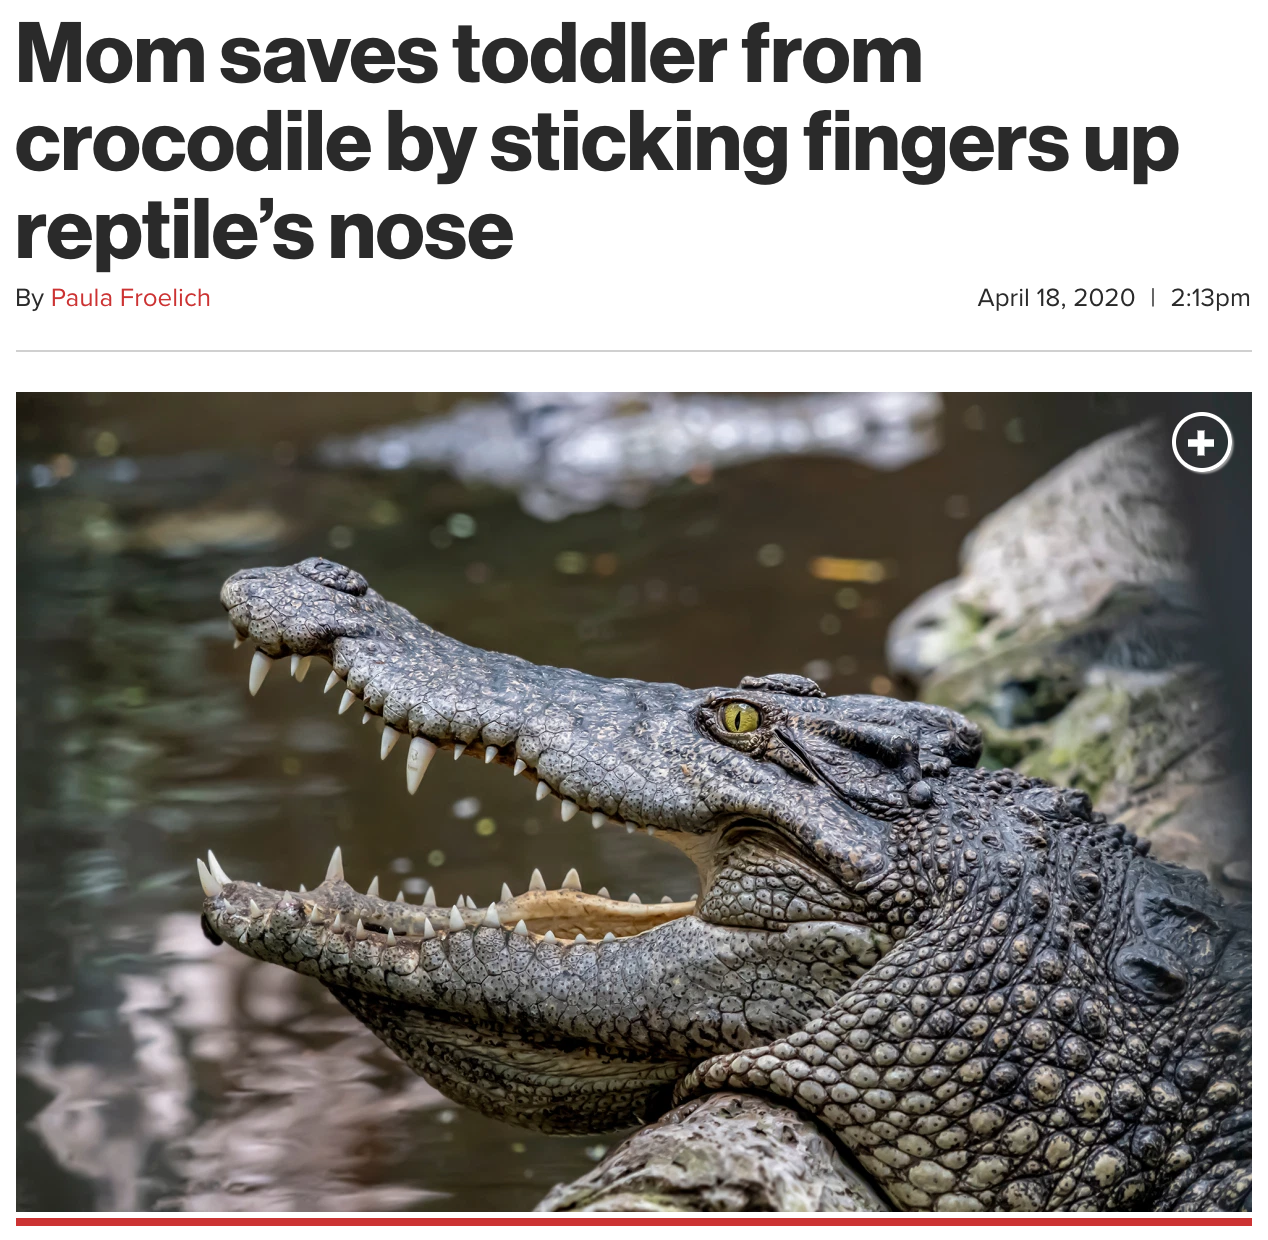 Mom saves toddler from crocodile by sticking fingers up reptile's nose